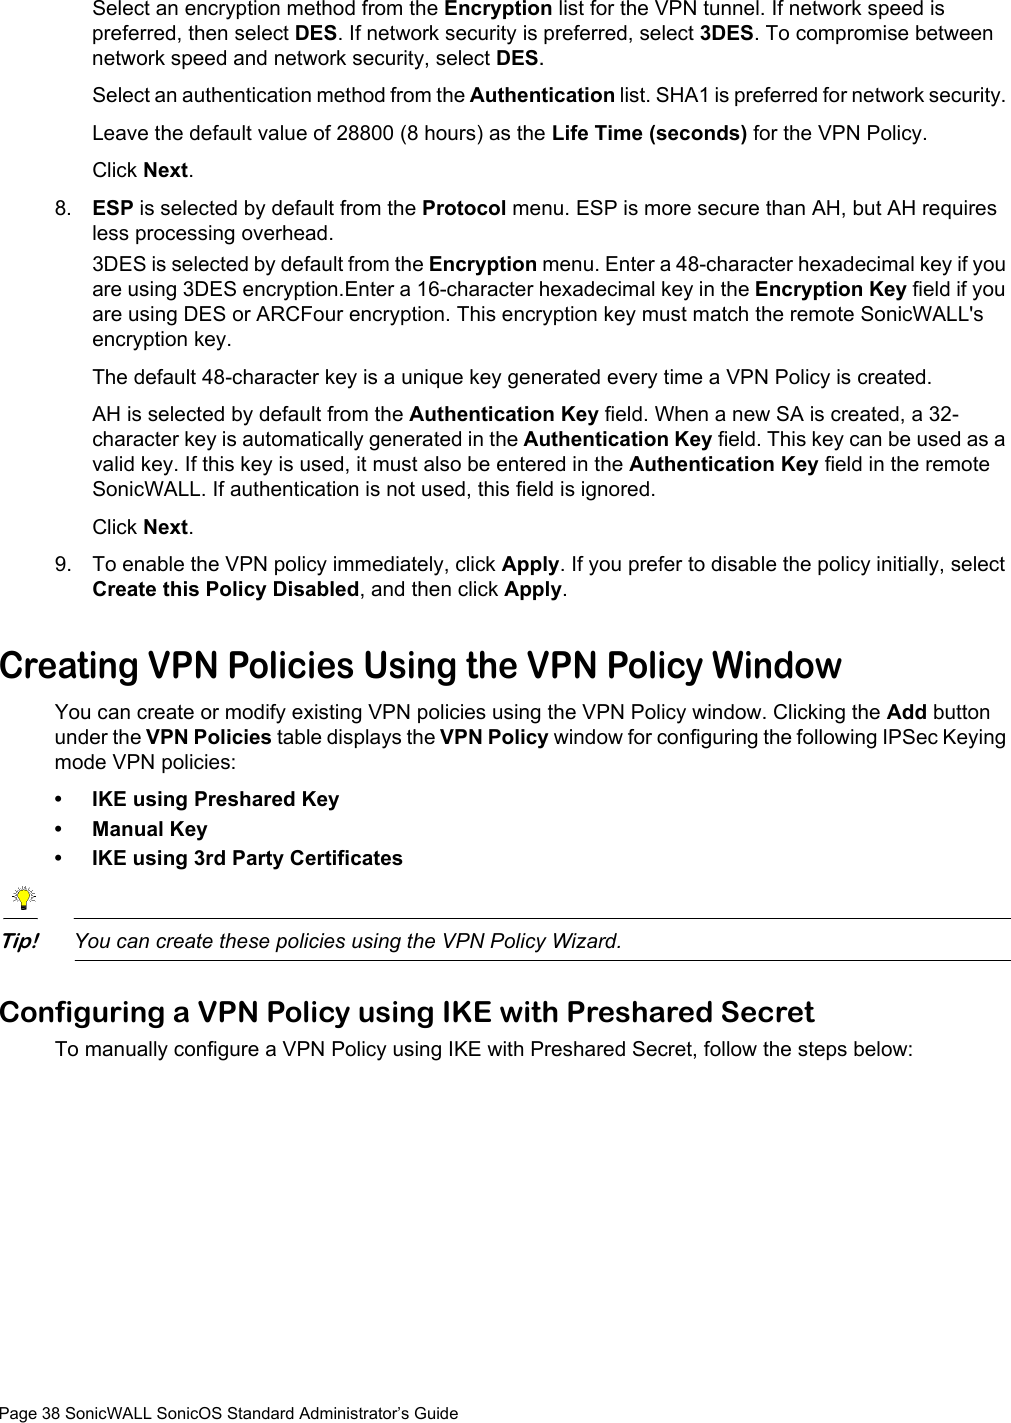 Page 38 SonicWALL SonicOS Standard Administrator’s GuideSelect an encryption method from the Encryption list for the VPN tunnel. If network speed is preferred, then select DES. If network security is preferred, select 3DES. To compromise between network speed and network security, select DES.Select an authentication method from the Authentication list. SHA1 is preferred for network security. Leave the default value of 28800 (8 hours) as the Life Time (seconds) for the VPN Policy. Click Next. 8. ESP is selected by default from the Protocol menu. ESP is more secure than AH, but AH requires less processing overhead.3DES is selected by default from the Encryption menu. Enter a 48-character hexadecimal key if you are using 3DES encryption.Enter a 16-character hexadecimal key in the Encryption Key field if you are using DES or ARCFour encryption. This encryption key must match the remote SonicWALL&apos;s encryption key. The default 48-character key is a unique key generated every time a VPN Policy is created. AH is selected by default from the Authentication Key field. When a new SA is created, a 32-character key is automatically generated in the Authentication Key field. This key can be used as a valid key. If this key is used, it must also be entered in the Authentication Key field in the remote SonicWALL. If authentication is not used, this field is ignored.Click Next. 9. To enable the VPN policy immediately, click Apply. If you prefer to disable the policy initially, select Create this Policy Disabled, and then click Apply.Creating VPN Policies Using the VPN Policy WindowYou can create or modify existing VPN policies using the VPN Policy window. Clicking the Add button under the VPN Policies table displays the VPN Policy window for configuring the following IPSec Keying mode VPN policies:• IKE using Preshared Key• Manual Key• IKE using 3rd Party CertificatesTip!You can create these policies using the VPN Policy Wizard.Configuring a VPN Policy using IKE with Preshared SecretTo manually configure a VPN Policy using IKE with Preshared Secret, follow the steps below: